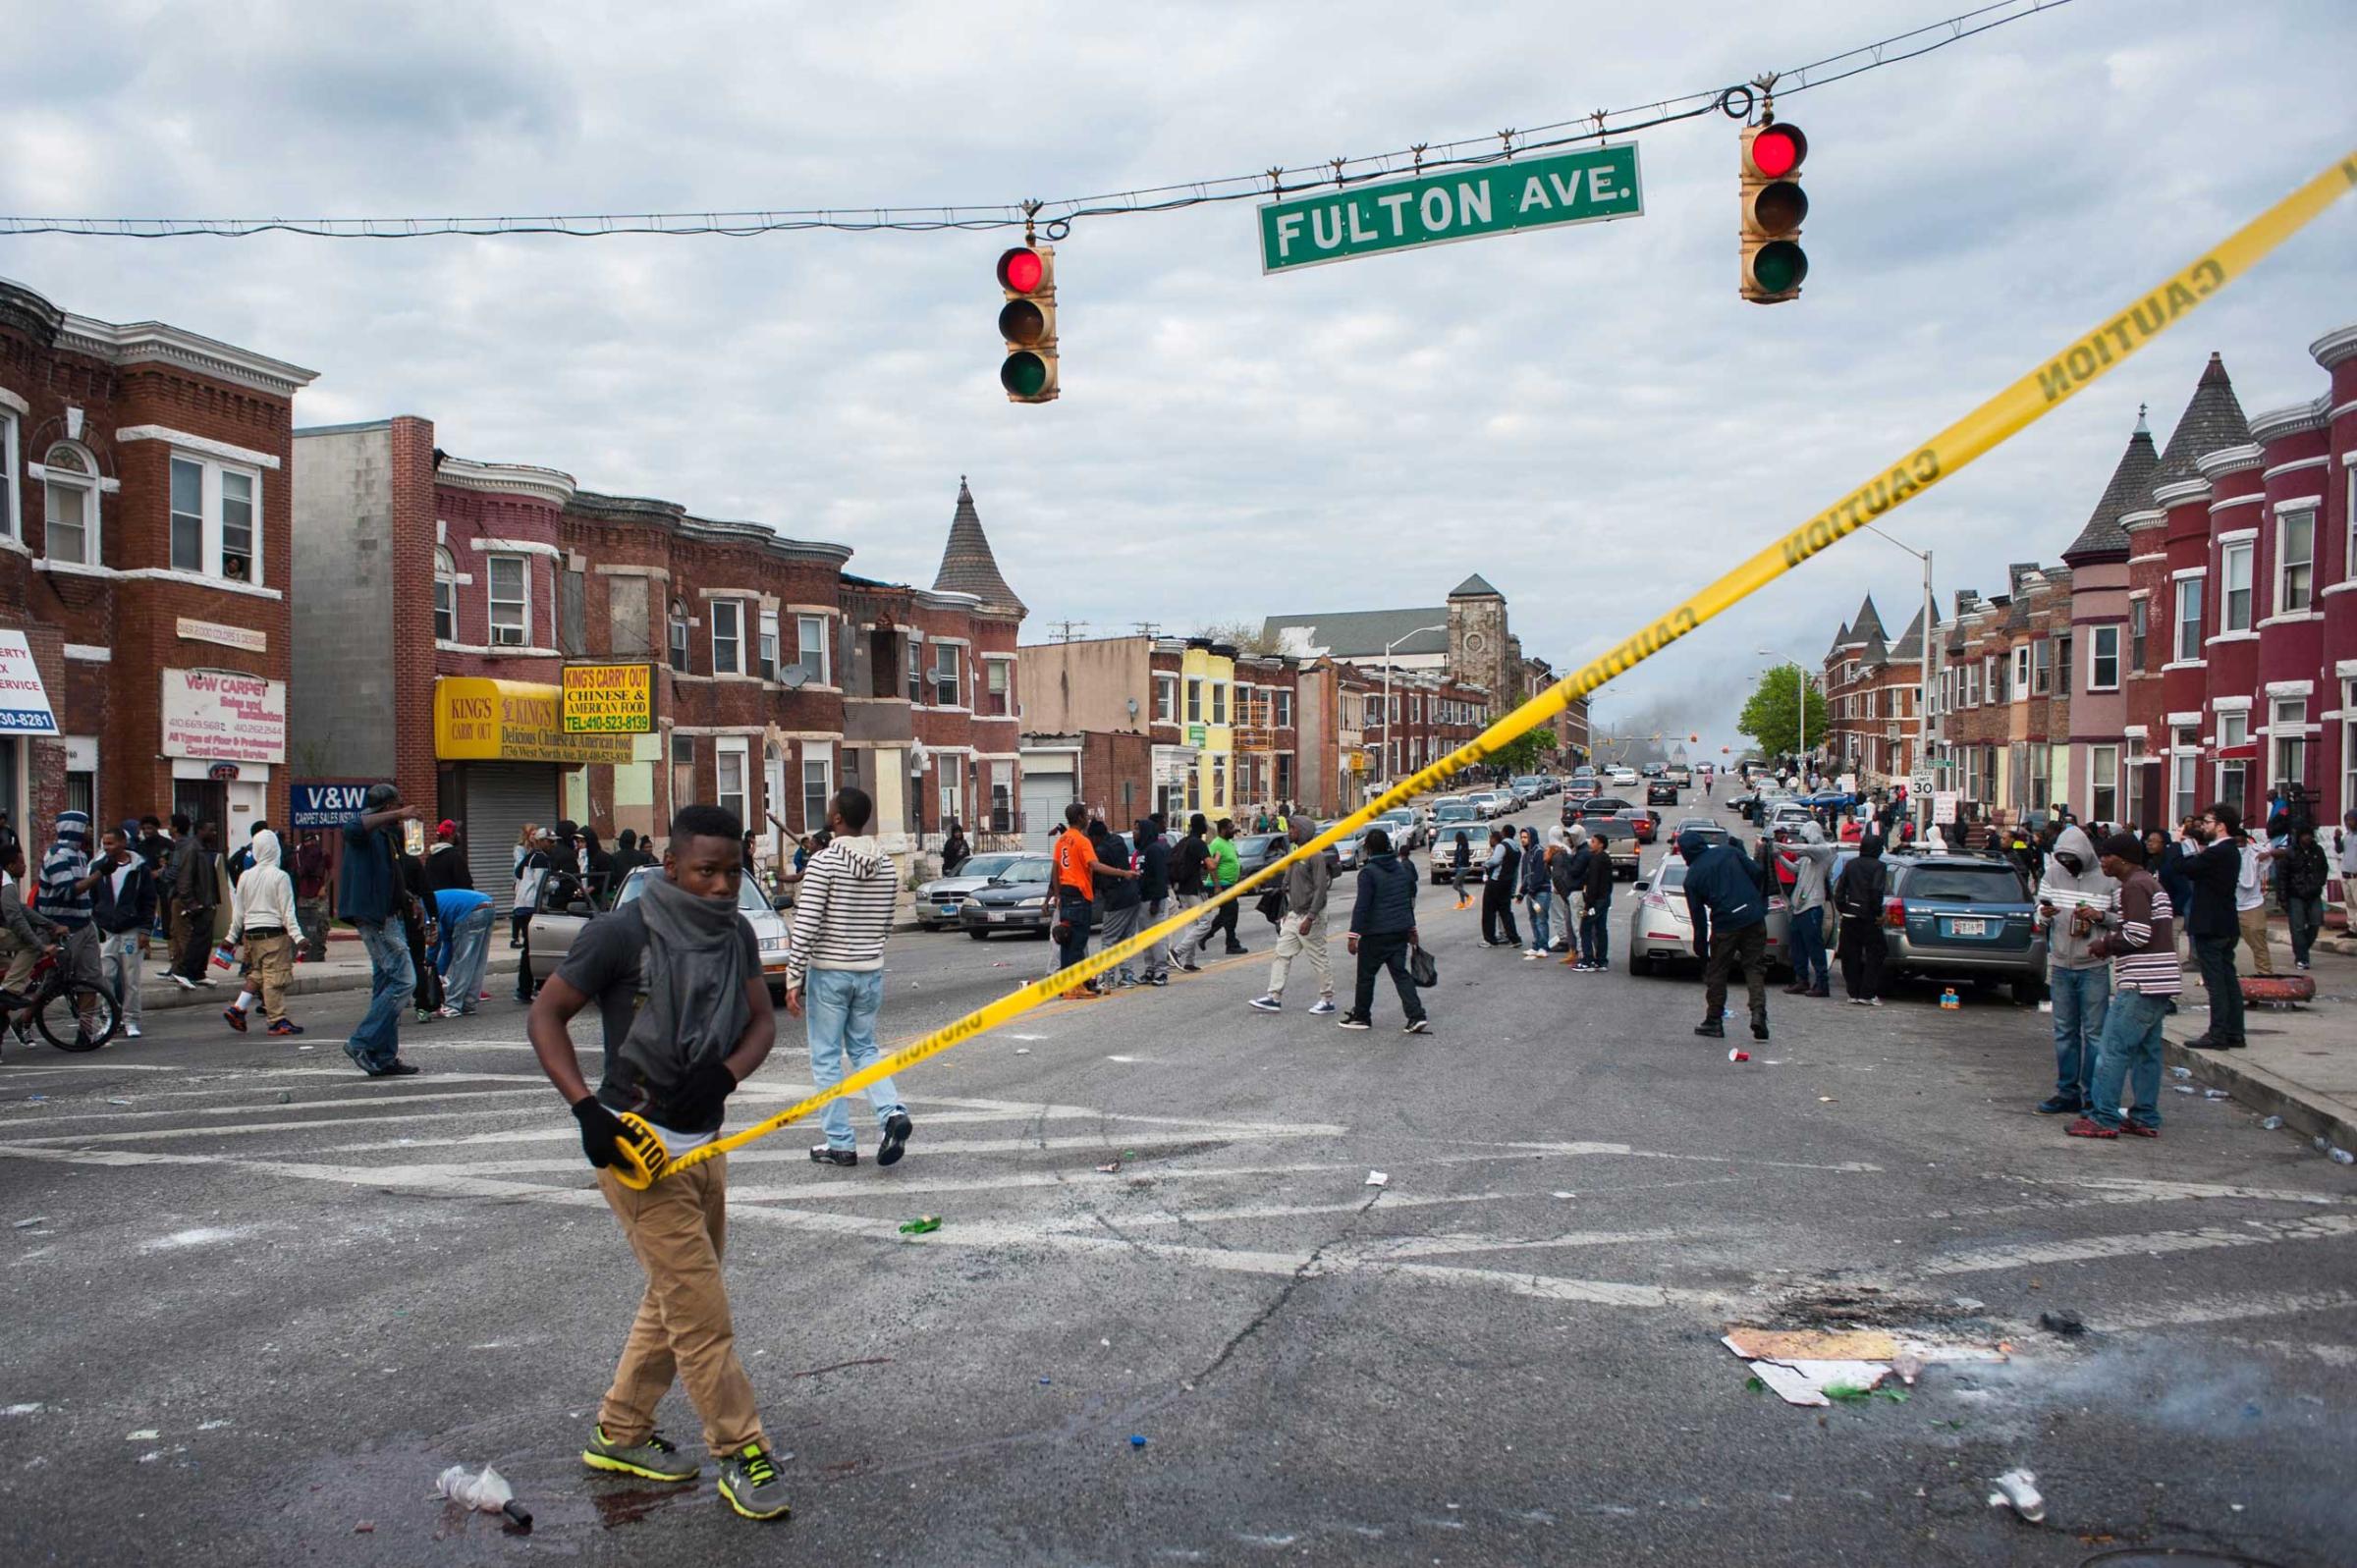 Demonstrators Gather Outside Baltimore Police Station to Protest Death of Freddie Gray